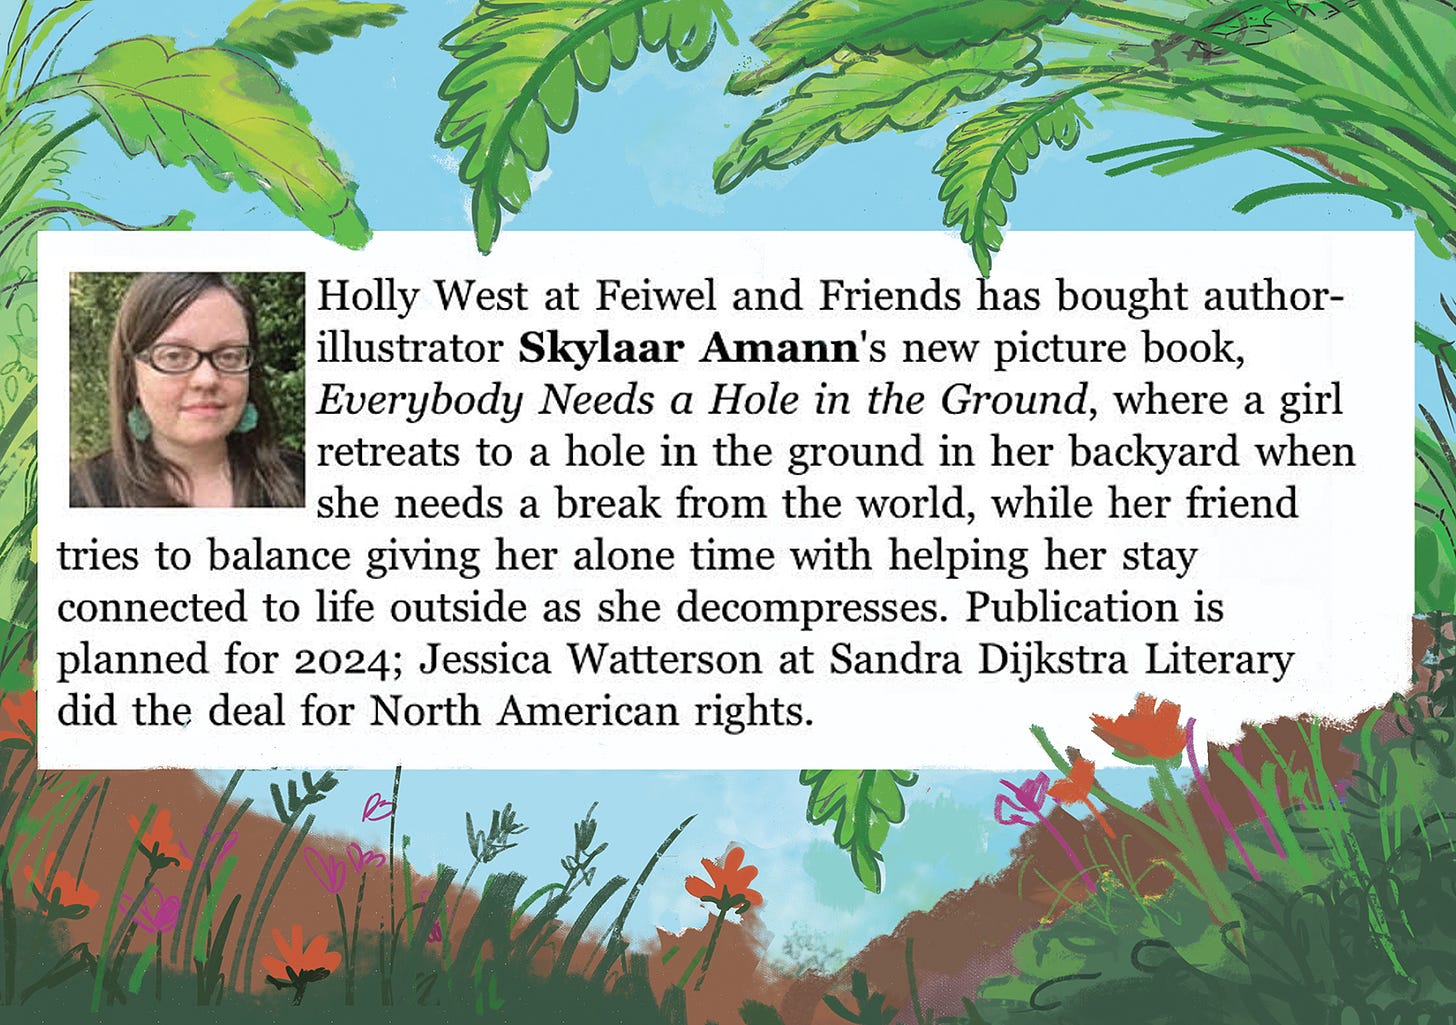 Deal announcement for a picture book called Everybody Needs a Hole in the Ground. It says Holly West at Feiwel and Friends acquired North American rights for the book and Jessica Watterson at Sandra Dijkstra Literary did the deal for Skylaar Amann, the author and illustrator.